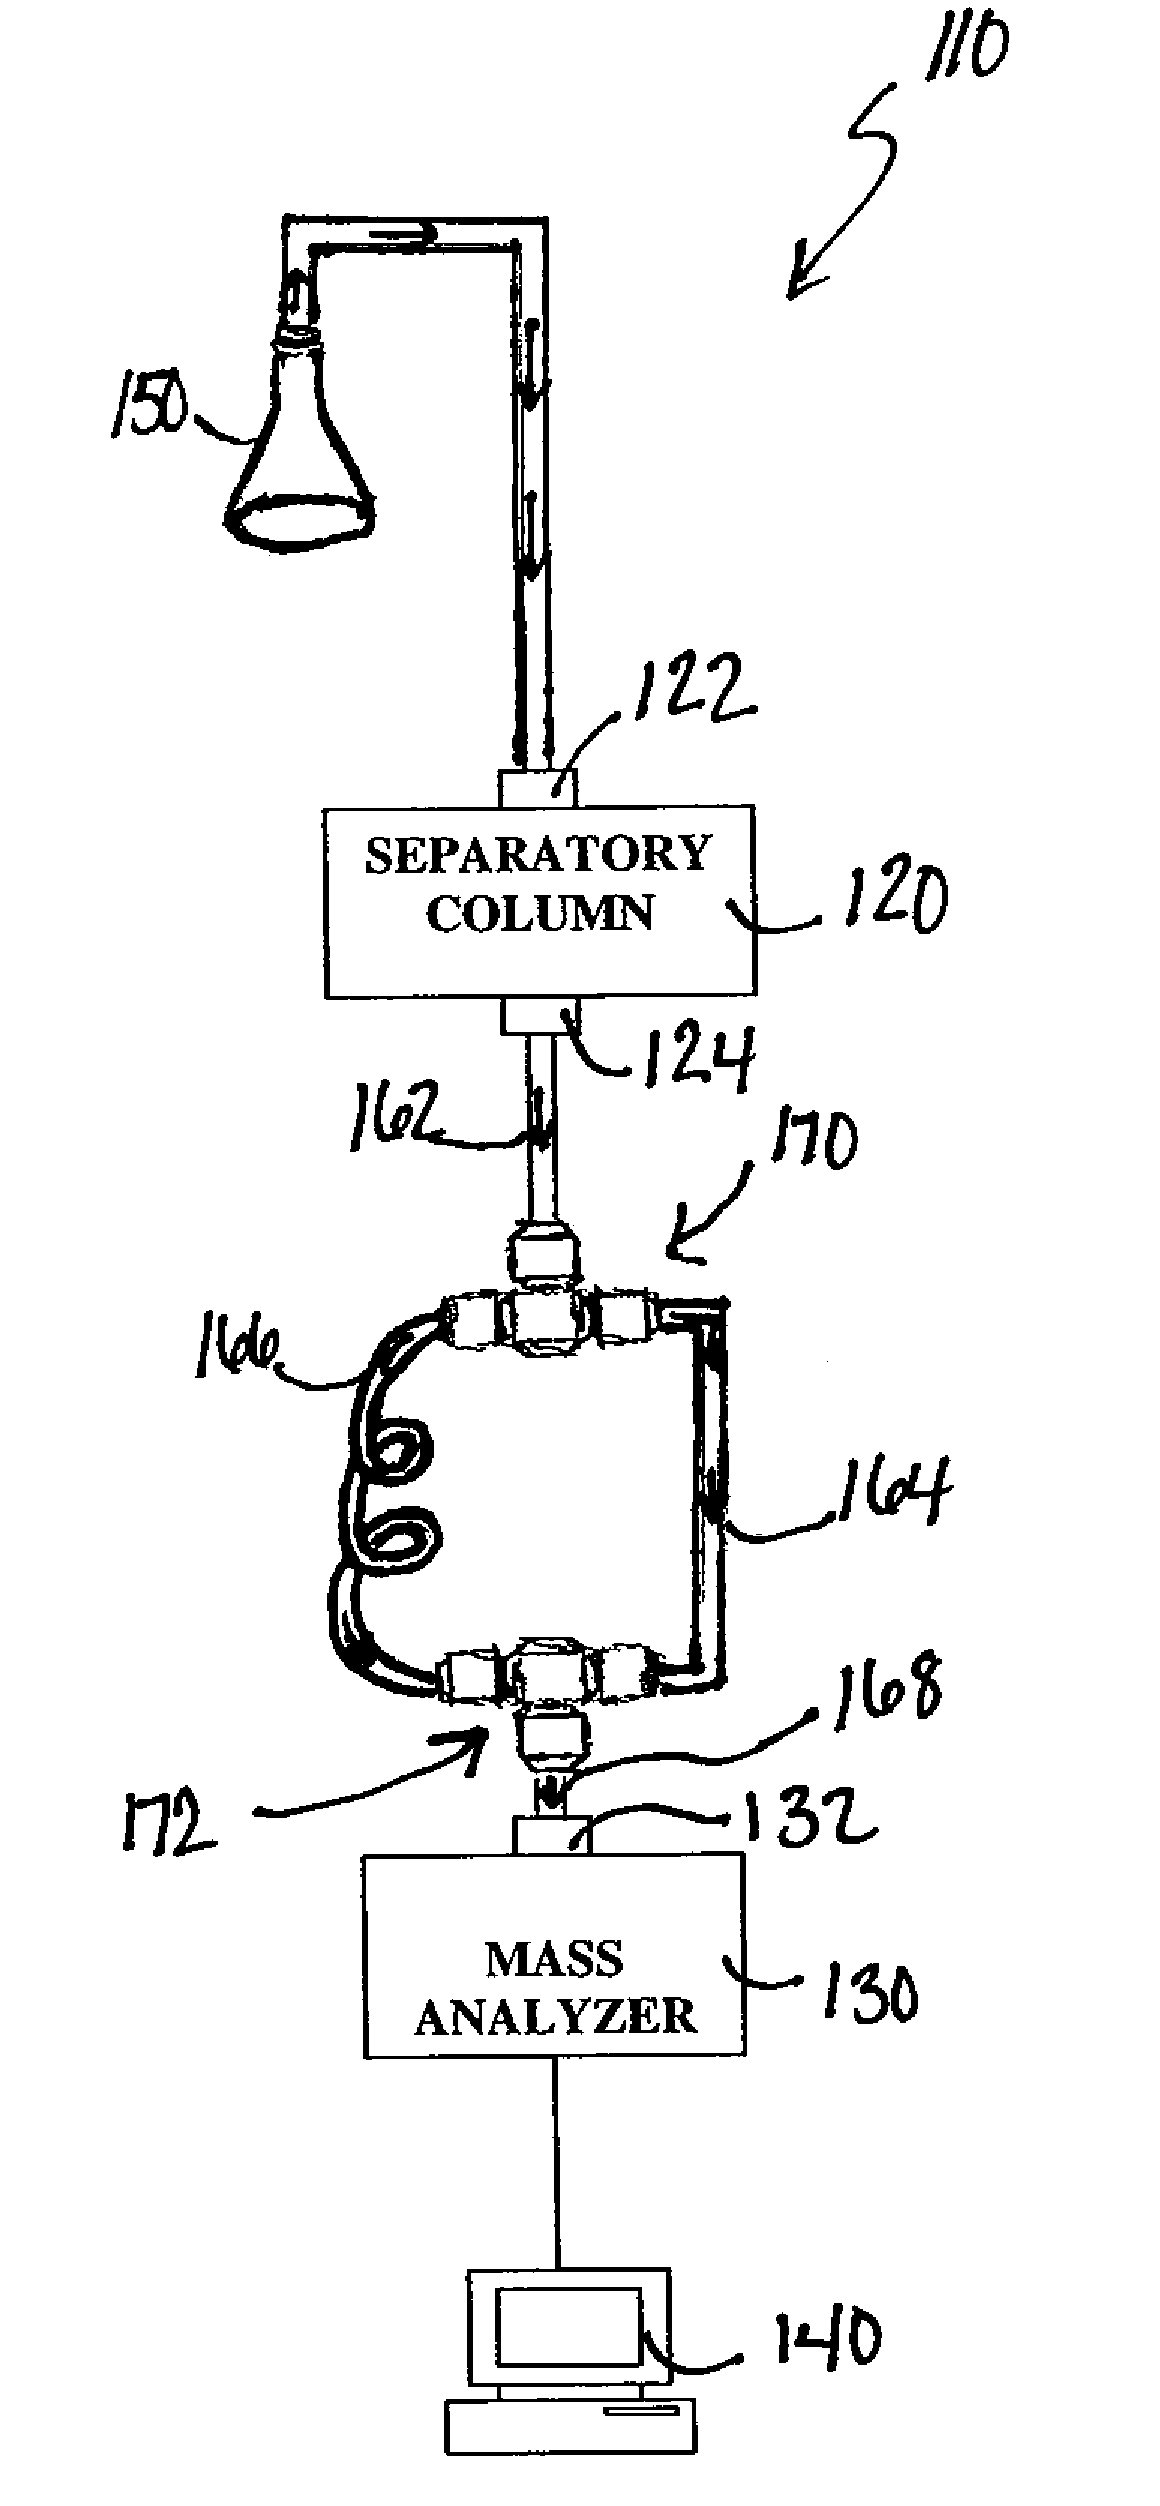 Apparatus system and method for mass analysis of a sample